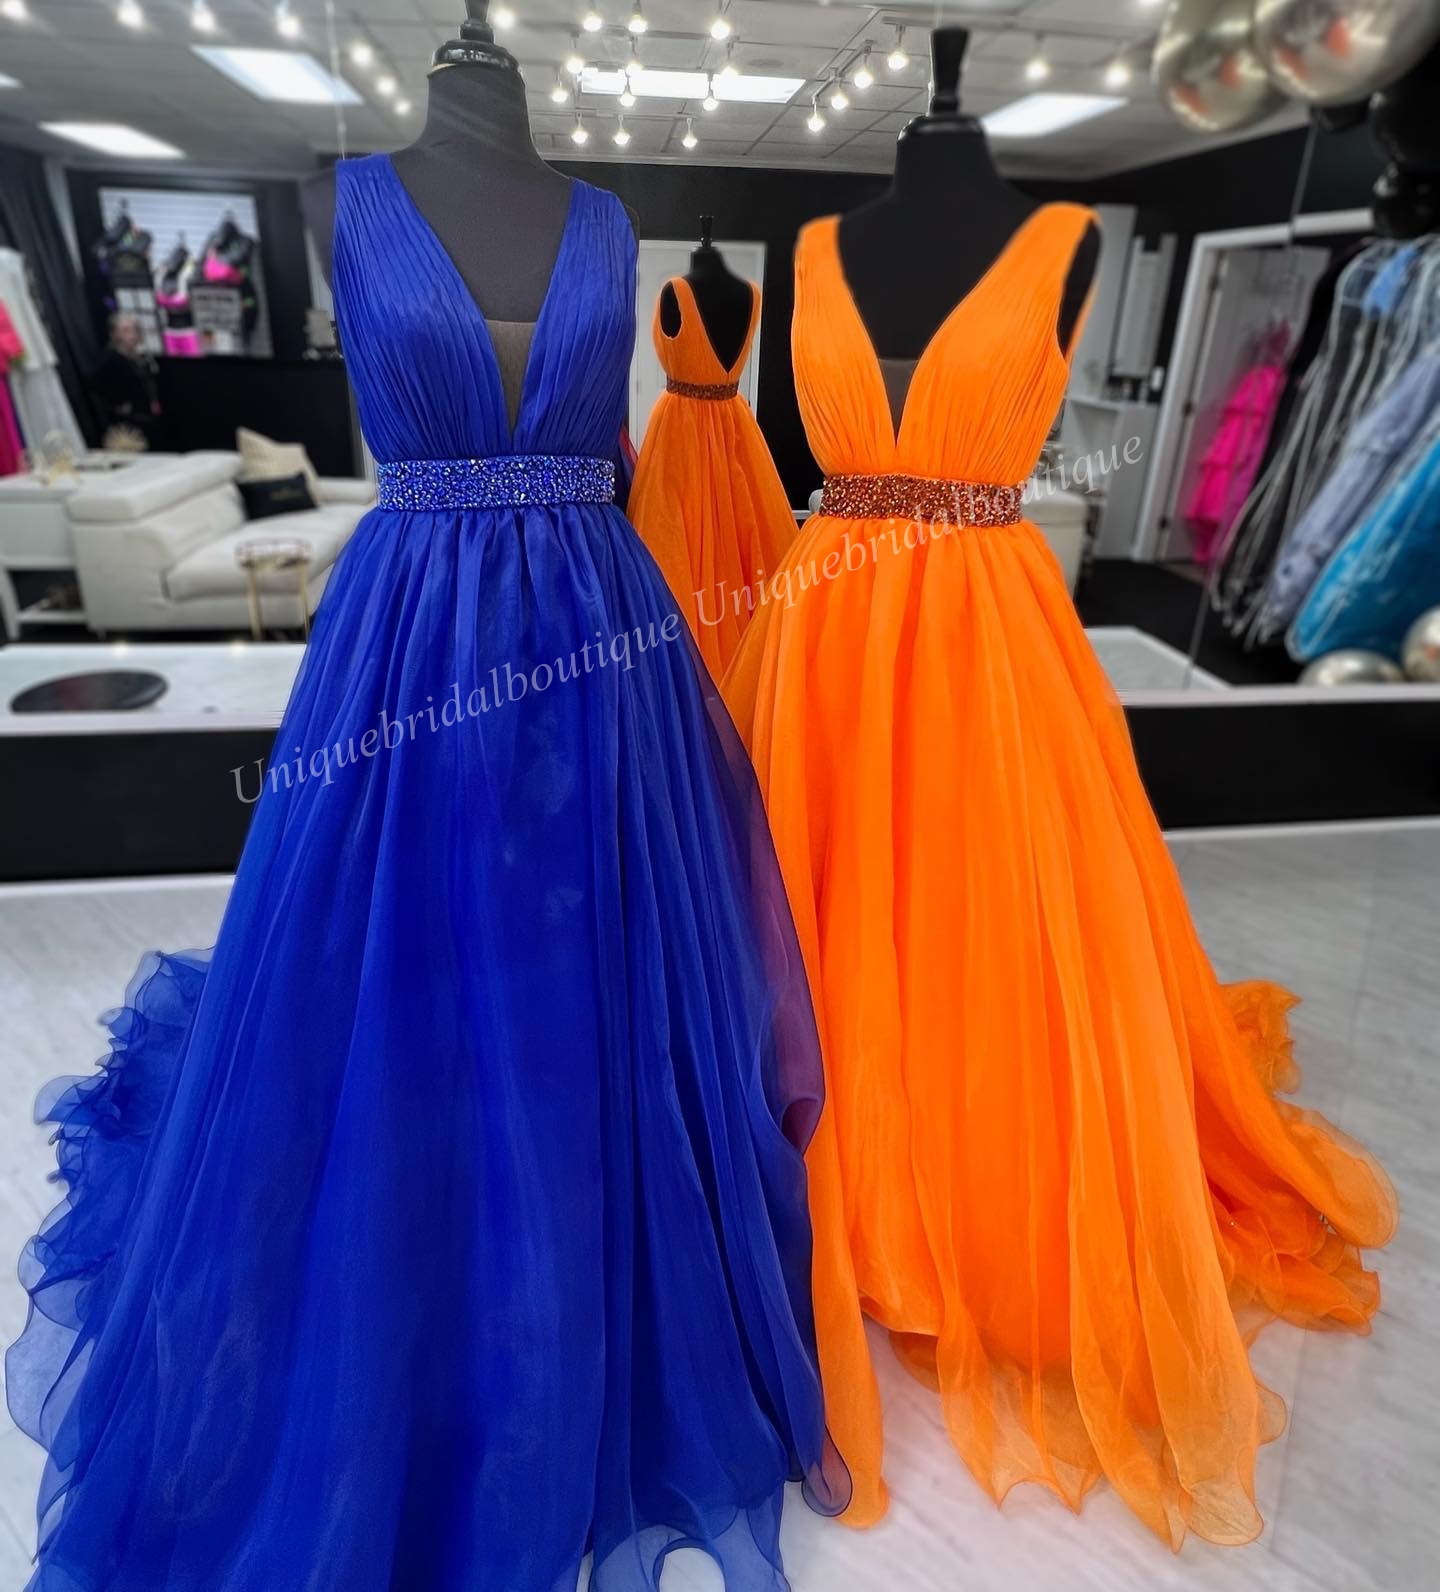 PUMGING V-HECK BALLGOWN PROM DRESS 2K23 Orange Organza Crystal Midjeband Lady Pageant Formell Evening Evening Event Party Runway Black-Tie Gala Gown Junior Senior Royal Red